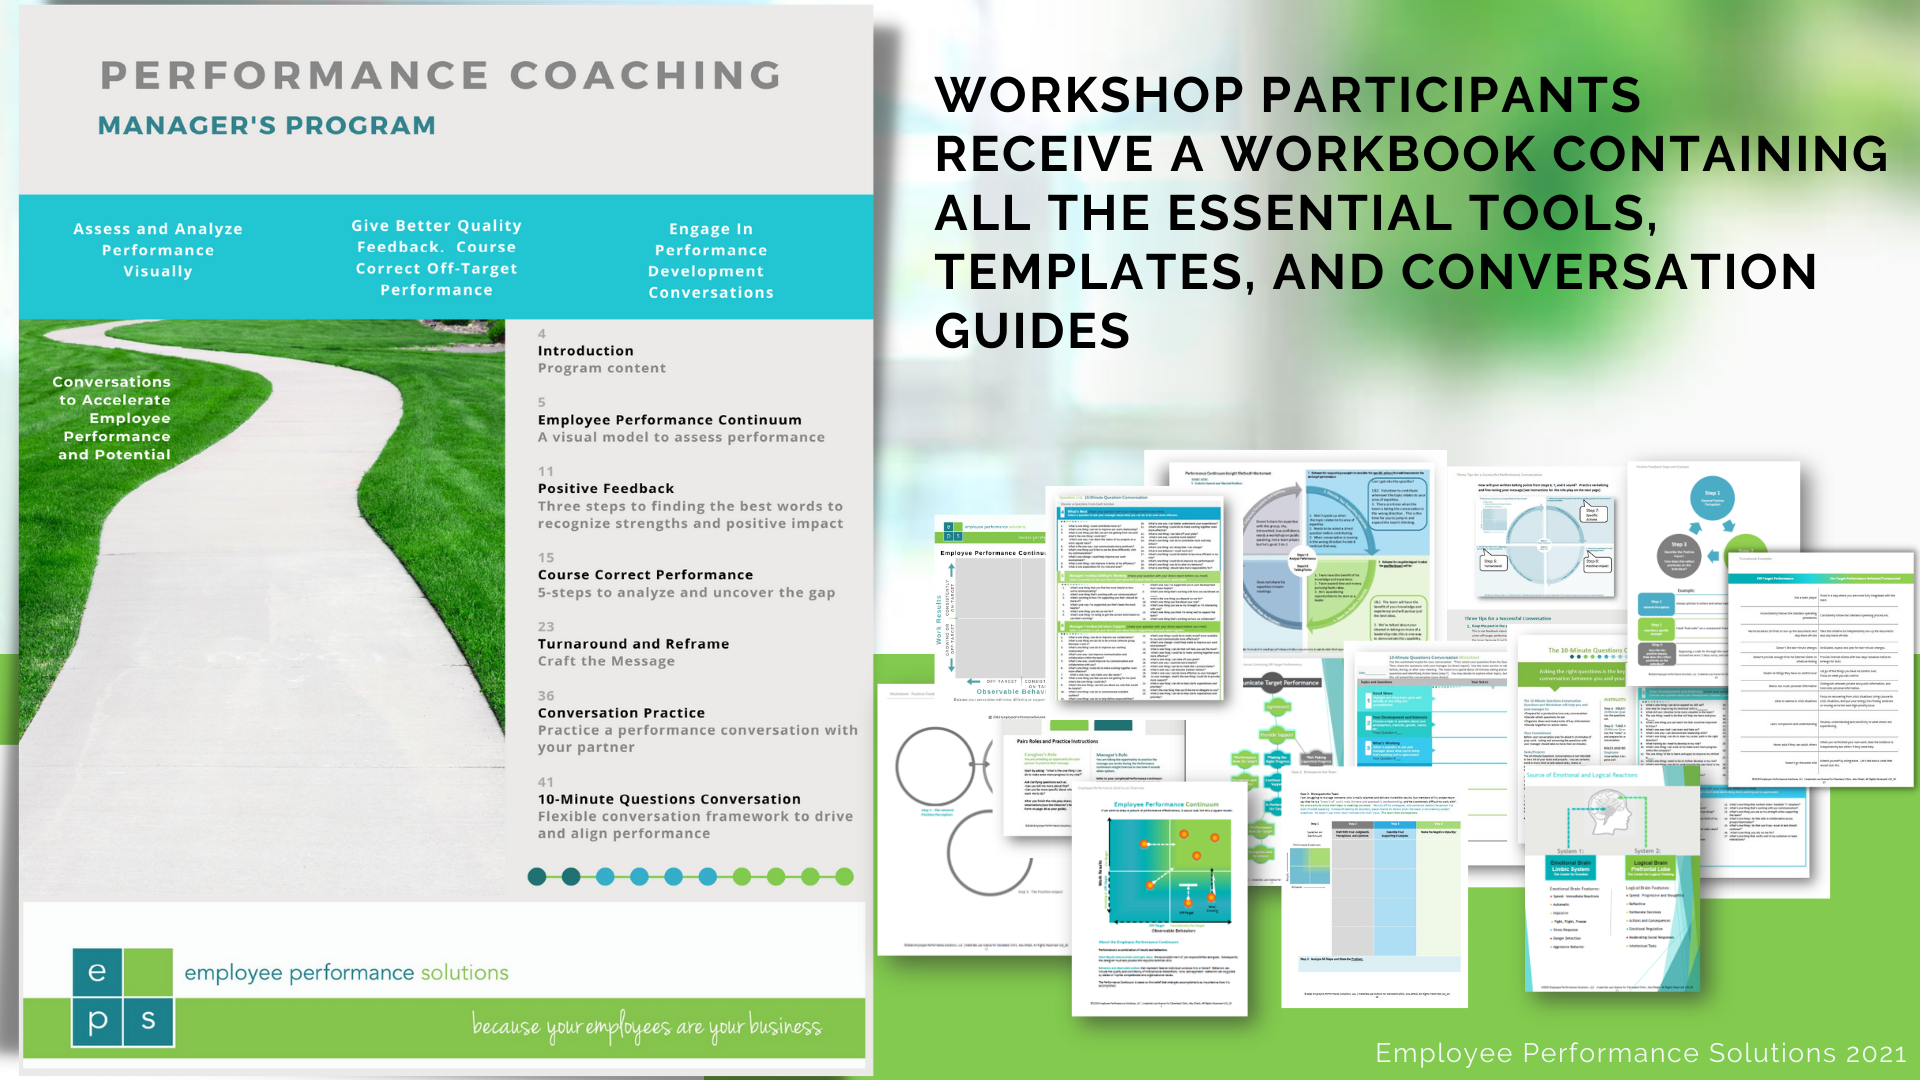 Performance Coaching Manager Training Materials